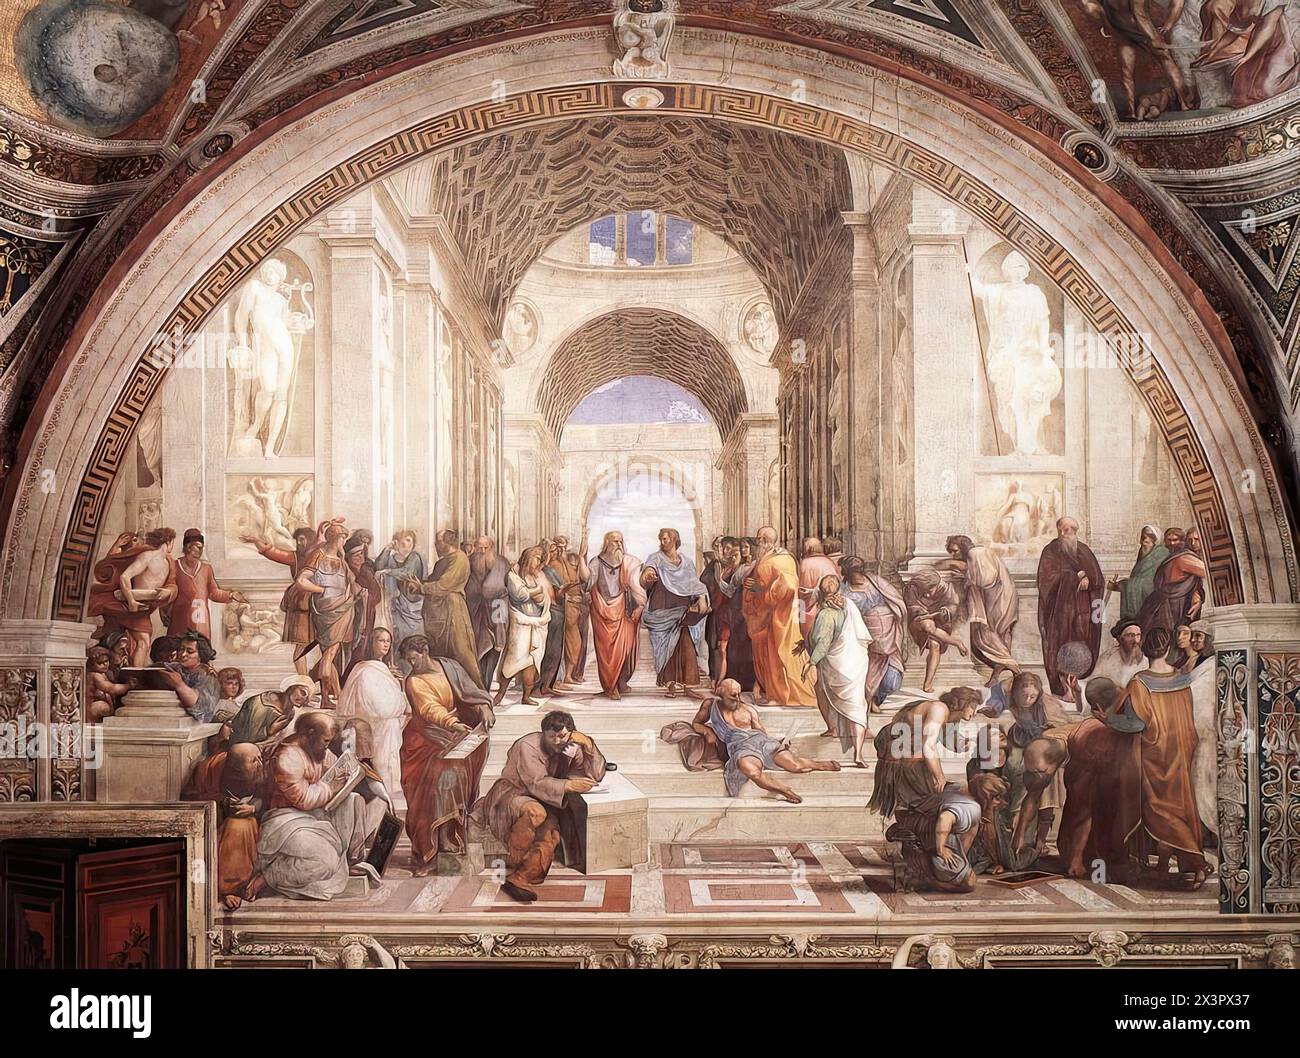 RAFFAELLO Sanzio (b. 1483, Urbino, d. 1520, Roma)  The School of Athens 1509 Fresco, width at the base 770 cm Stanza della Segnatura, Palazzi Pontifici, Vatican  The School of Athens is a depiction of philosophy. The scene takes place in classical times, as both the architecture and the garments indicate. Figures representing each subject that must be mastered in order to hold a true philosophic debate - astronomy, geometry, arithmetic, and solid geometry - are depicted in concrete form. The arbiters of this rule, the main figures, Plato and Aristotle, are shown in the centre, engaged in such Stock Photo